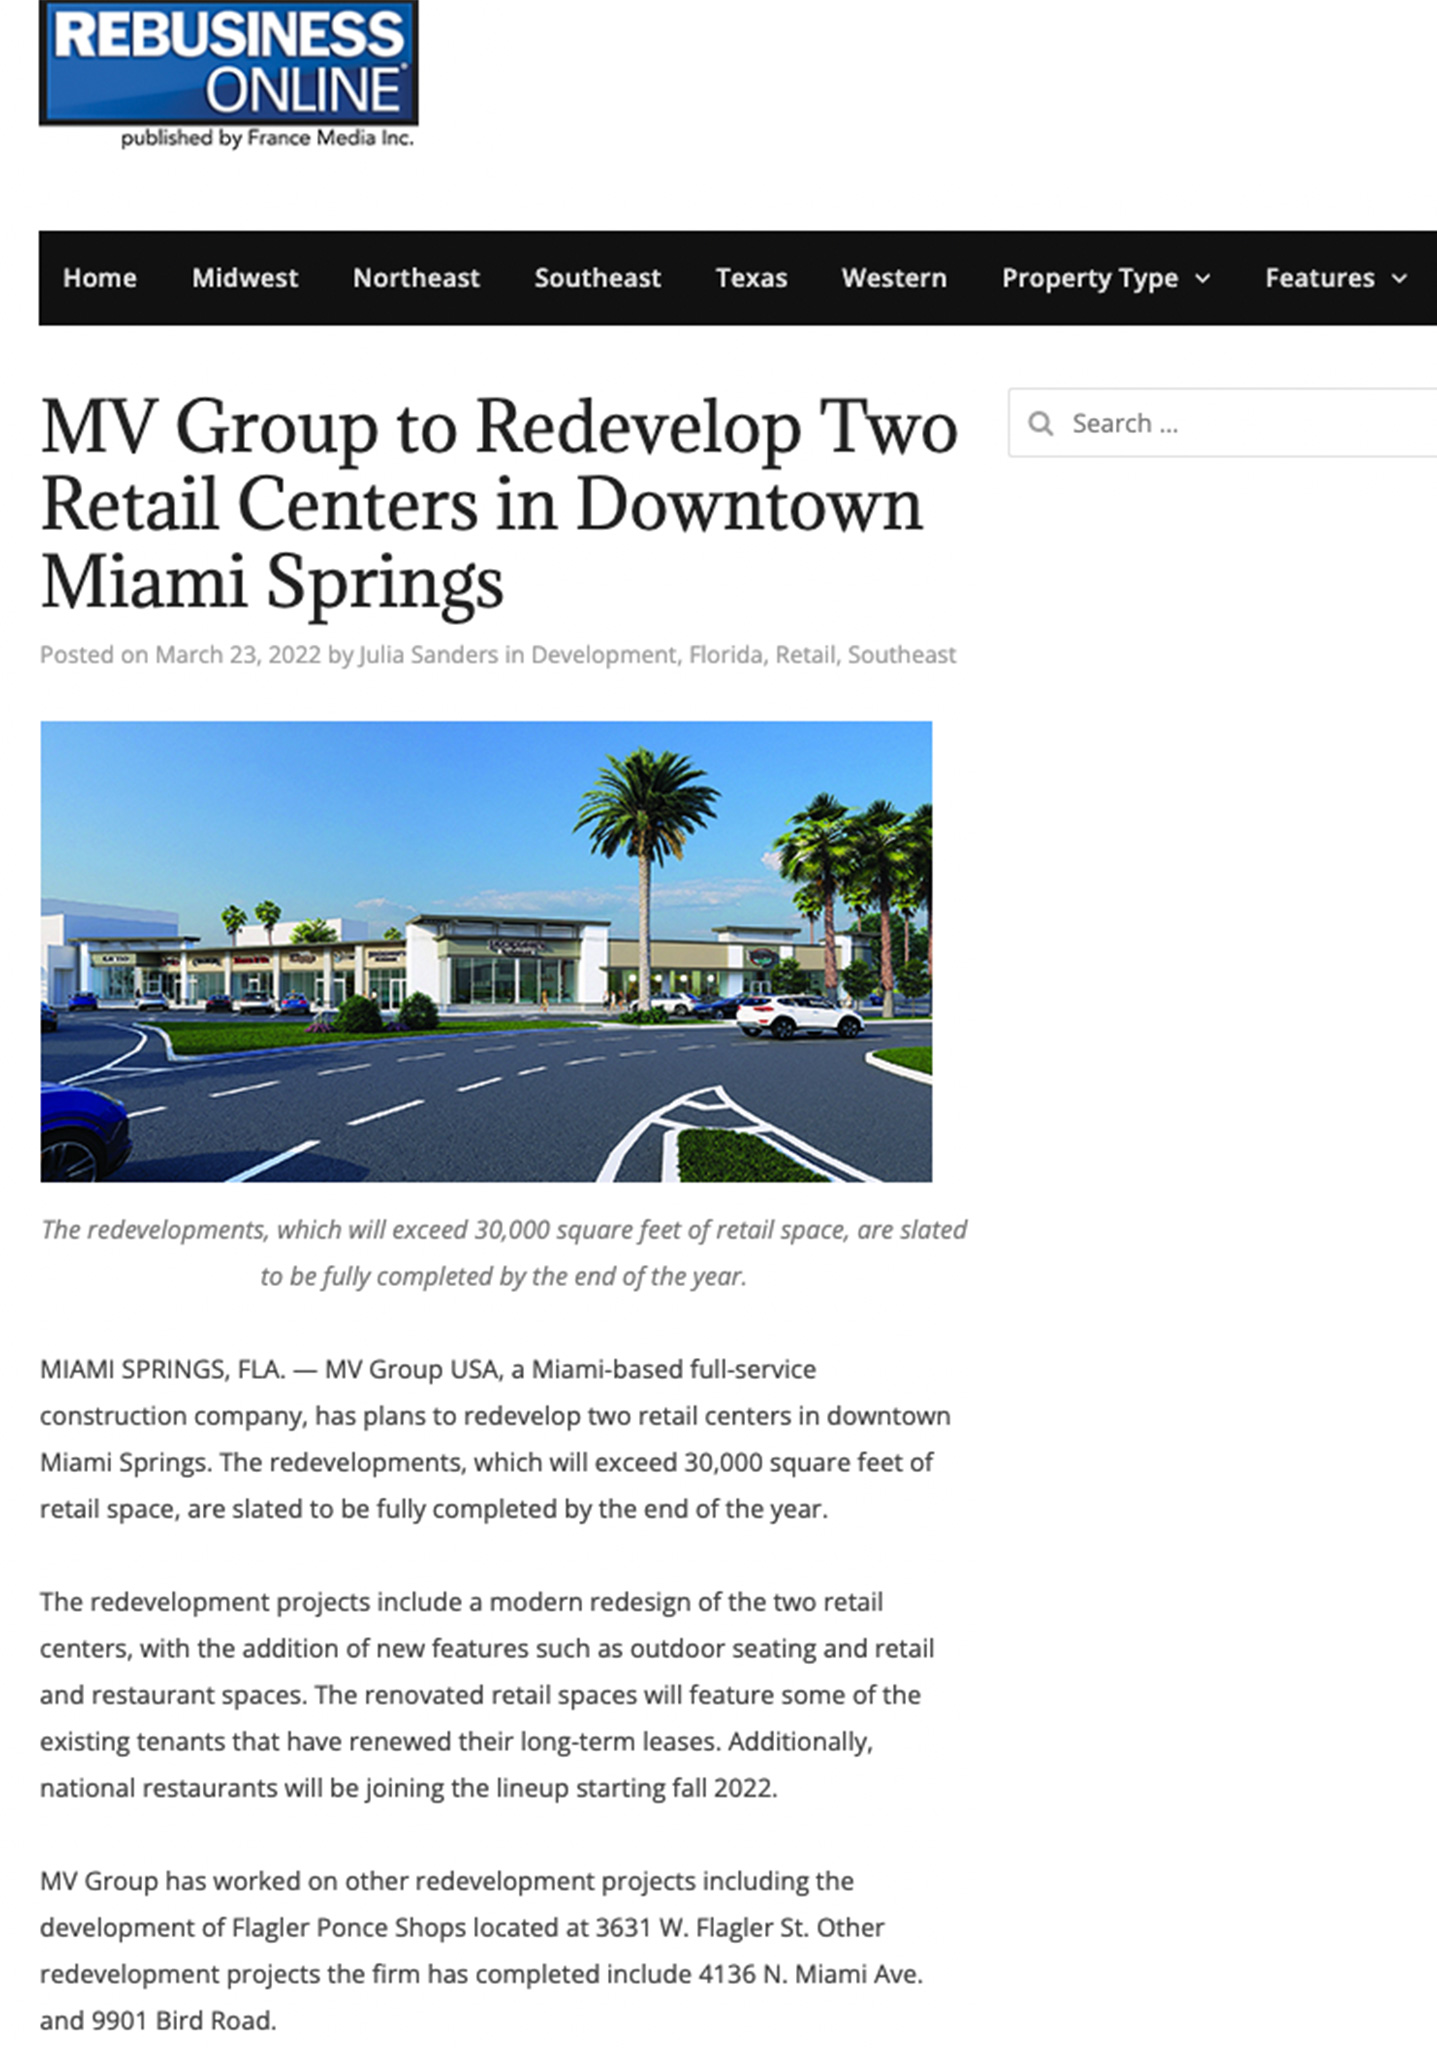 ReBusiness Online – MV Group to Redevelop Two Retail Centers in Downtown Miami Springs